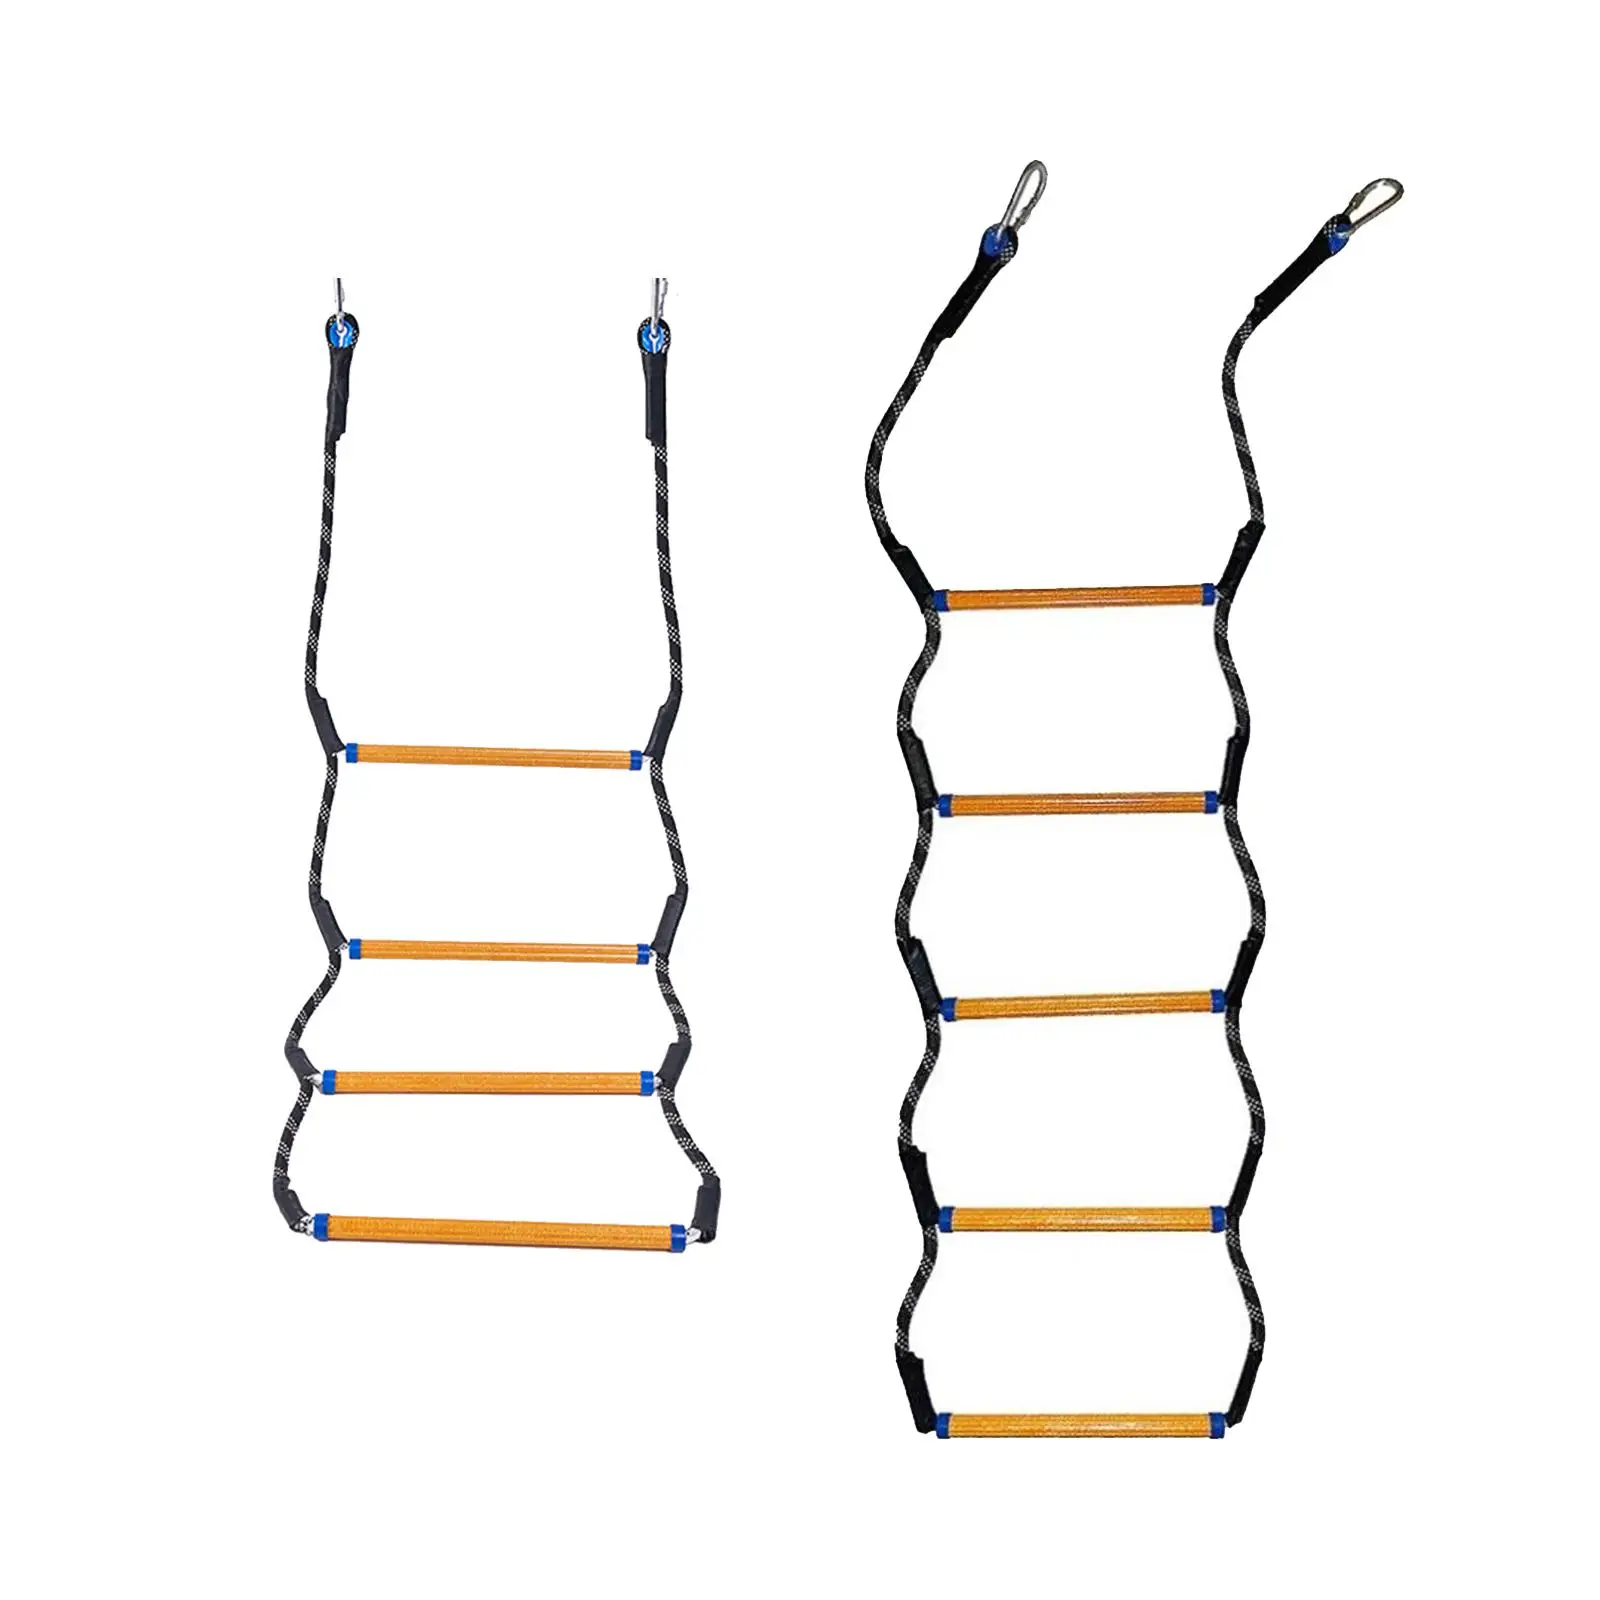 Boat Rope Ladder Assist Boarding Ladder Resin Rungs Climbing Ladders for Inflatable Boat Kayaking Sailing Motorboat Fishing Boat